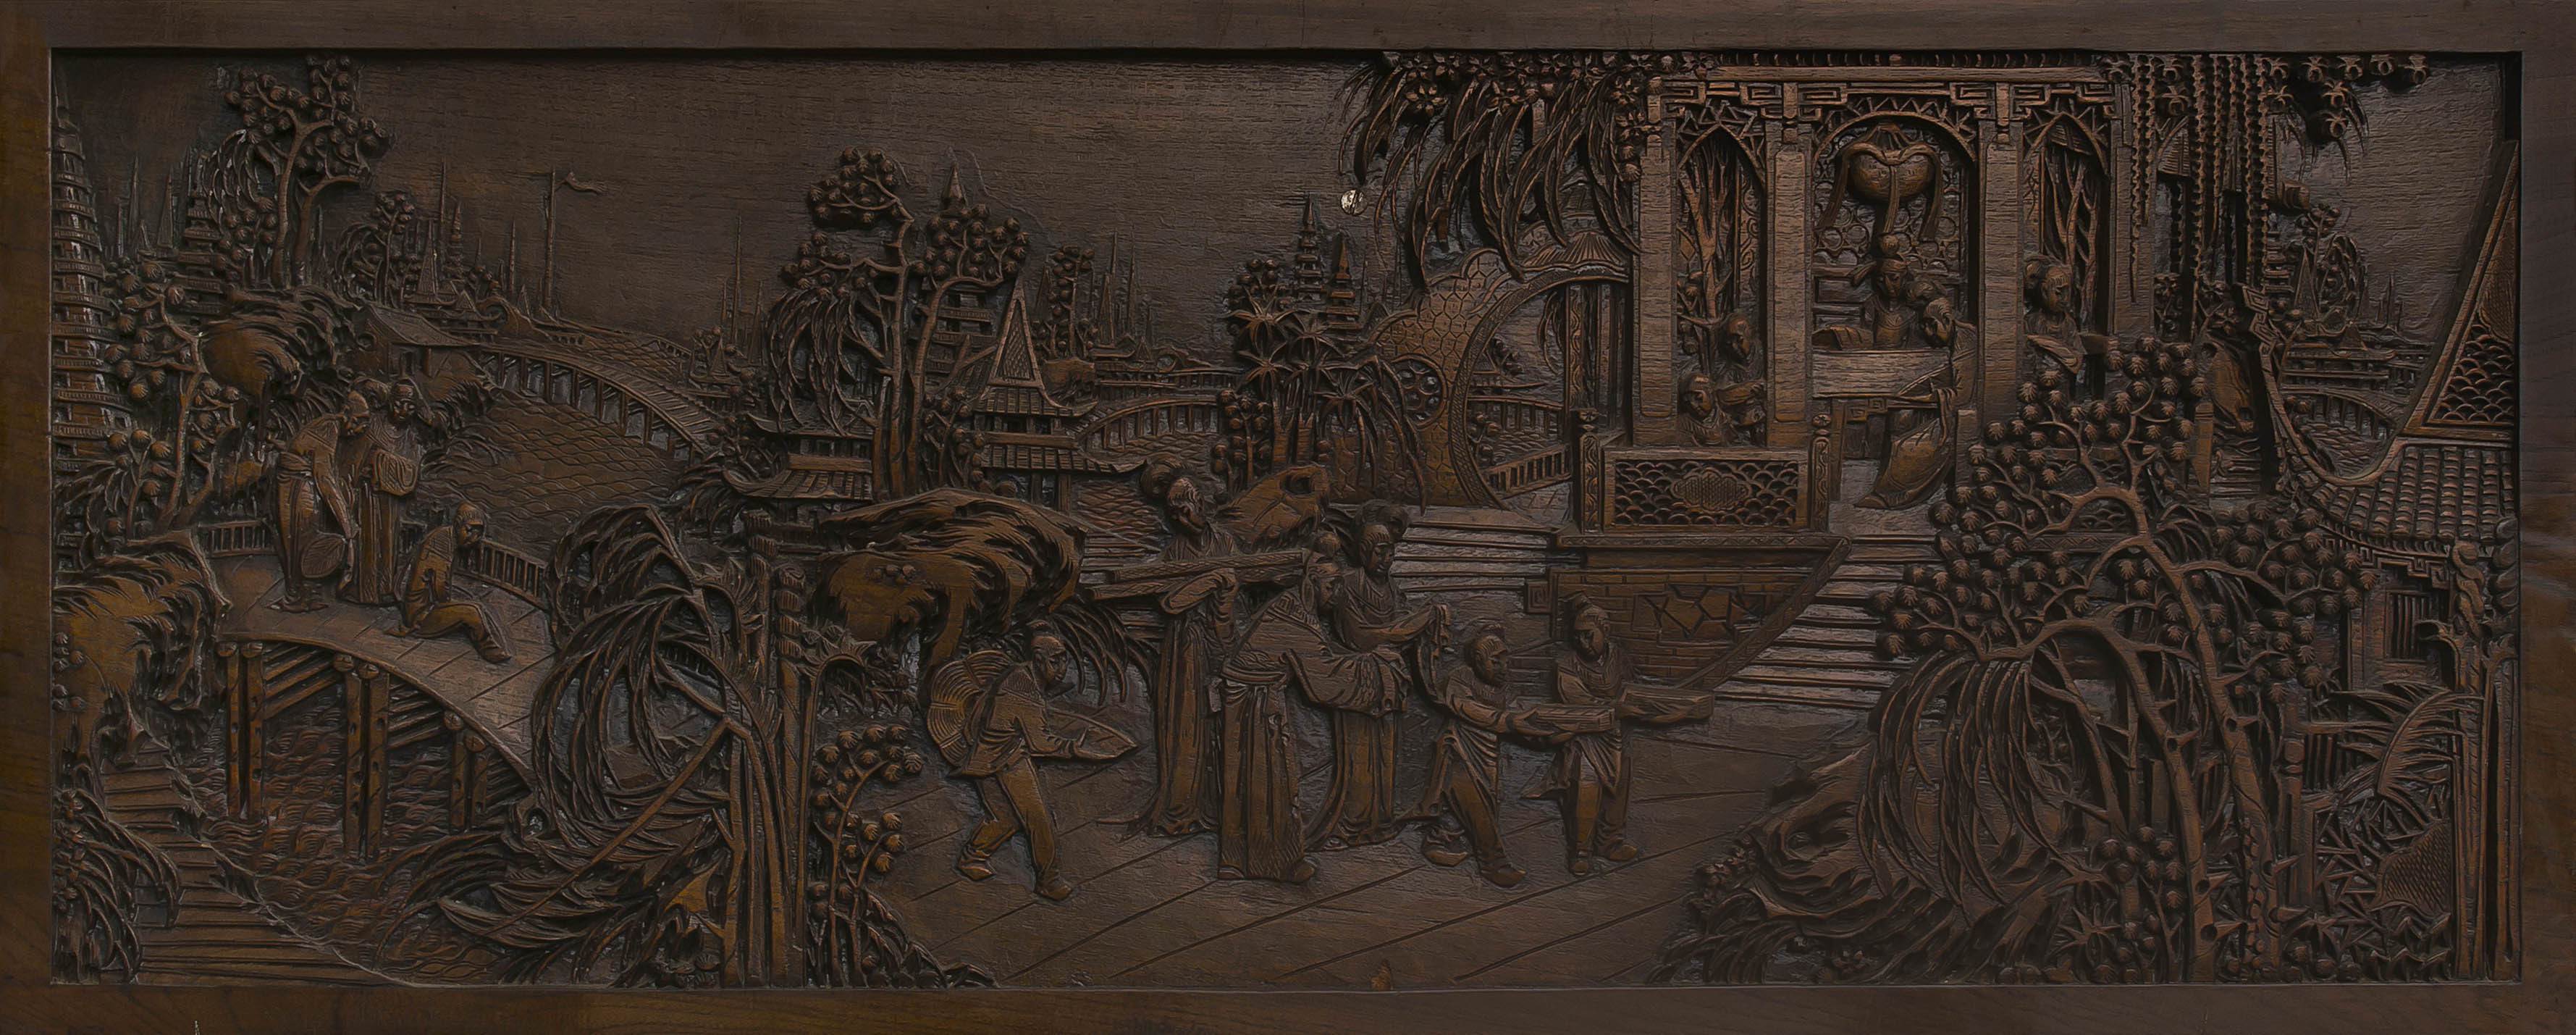 A set of seven Chinese Export carved teak panels, late 19th/early 20th century